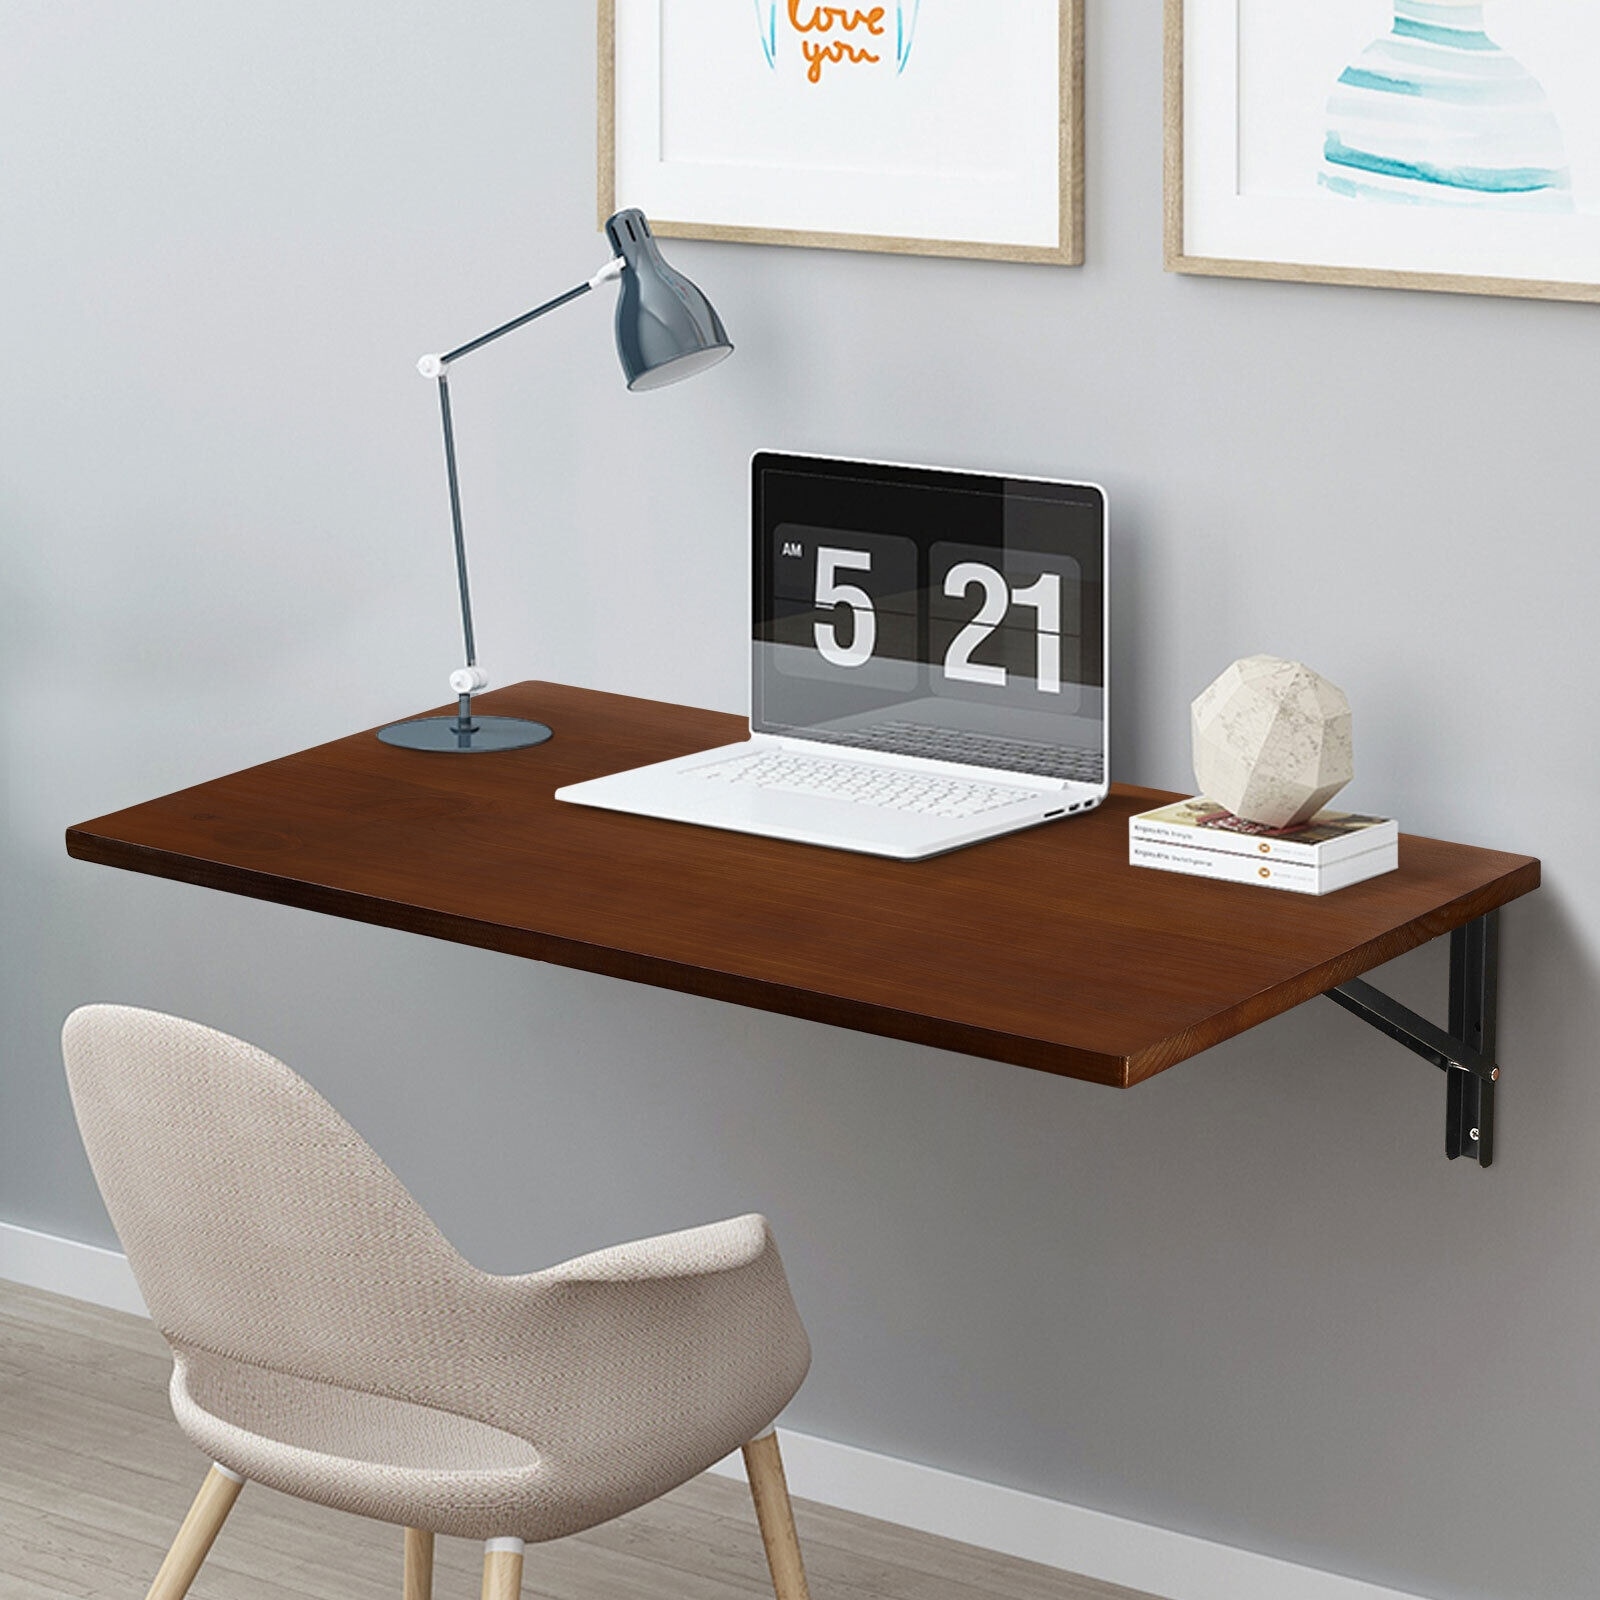  Wall-mounted laptop folding table, folding wall-mounted desk  workstation, all-in-one wall-mounted folding craft table with storage  space, suitable for small spaces such as bedrooms and study rooms. ( : Home  & Kitchen